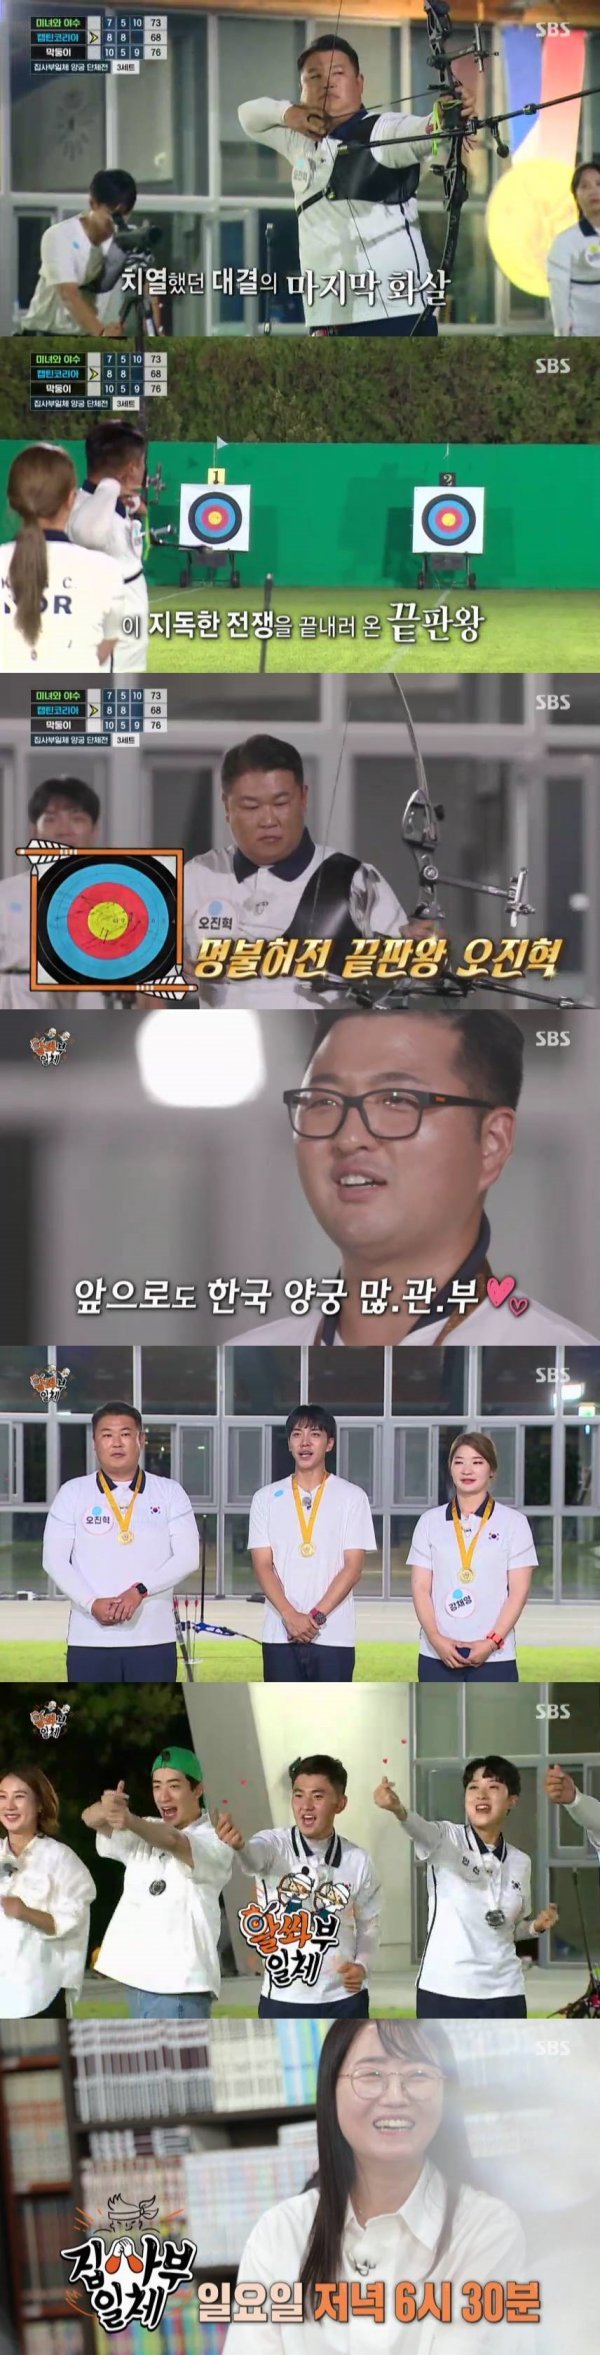 With the tense confrontation with SBSs All The Butlers archery national team adding to the fun of watching, Oh Jin-Hyek became the main character of the Best One Minute.According to Nielsen Korea, a TV viewer rating company, SBS All The Butlers TV viewer ratings in the metropolitan area, which was broadcast on the 29th, were 6.5%, and 2049 target TV viewer ratings, which are topical and competitive indicators, were 3.2%, and the highest TV viewer ratings per minute were up to 9.7%.On the day of the show, archery team exhibitions with archery national team Oh Jin-Hyek, Kim Woo-jin, Kim je-deok, Anshan, Kang Chae-young and Kang Min-hee, who won gold medals at the 2020 Tokyo Olympics, were held.On this day, Oh Jin-Hyek surprised the members by saying, I shot this thing. He said, I hung the ring on the thread with event Kyonggi and shot the arrow in the ring while moving from side to side.I was hit by one shot, and I calculated that this would be the right time, he added.The six masters were divided into OB team Oh Jin-Hyek, Kim Woo-jin, Kang Chae-young, YB team Anshan, Kang Min-hee and Kim je-deok to challenge the bell tomatoes.Kim Woo-jin and Kang Chae-youngs arrows hit the cherry tomatoes, while Kim Je-deok and his eldest brother Oh Jin-Hyek penetrated and surprised.In addition, Oh Jin-Hyek was cheered by perfectly matching moving tomatoes at once.Since then, Master and members have been divided into three teams and have started a group exhibition with a gold badge.The youngest line Anshan, Kim je-deok, and Yoo Soo-bin are the bad teams, Oh Jin-Hyek, Kang Chae-young and Lee Seung-gi are the Captain America: Civil War Korea team, Kim Woo-jin, Kang Min-hee and Yang Se-hyung are the Beauty and the Beast team I did.Before the showdown, Anshan released a routine card that read, Central, Aim, 1 Second Tang! Im a little concise, Anshan said.It is a centralization, aiming, and tang in a second, he added. It is helpful to see the writing.Kim je-deok also showed his routine card and emphasized protecting his left arm. He said, When he shoots his bow and his left arm goes down, the arrow goes to the wrong place.You have to keep your arms until the arrow hits the target.When the full-scale confrontation began, the masters showed off their perfect skills like Kyonggi, and the members also attracted attention with their unexpected activities.The three teams, who showed their ability in the last minute, tied the game in the first set and added tension.The results of the second set showed that the team of Captain America: Civil War Korea and the Beast team had 52 points and the Beauty and the Beast team had 51 points.At the end of the broadcast, the appearance of writer Kim Eun-hee, the master of genres, was predicted, raising expectations for next weeks broadcast.